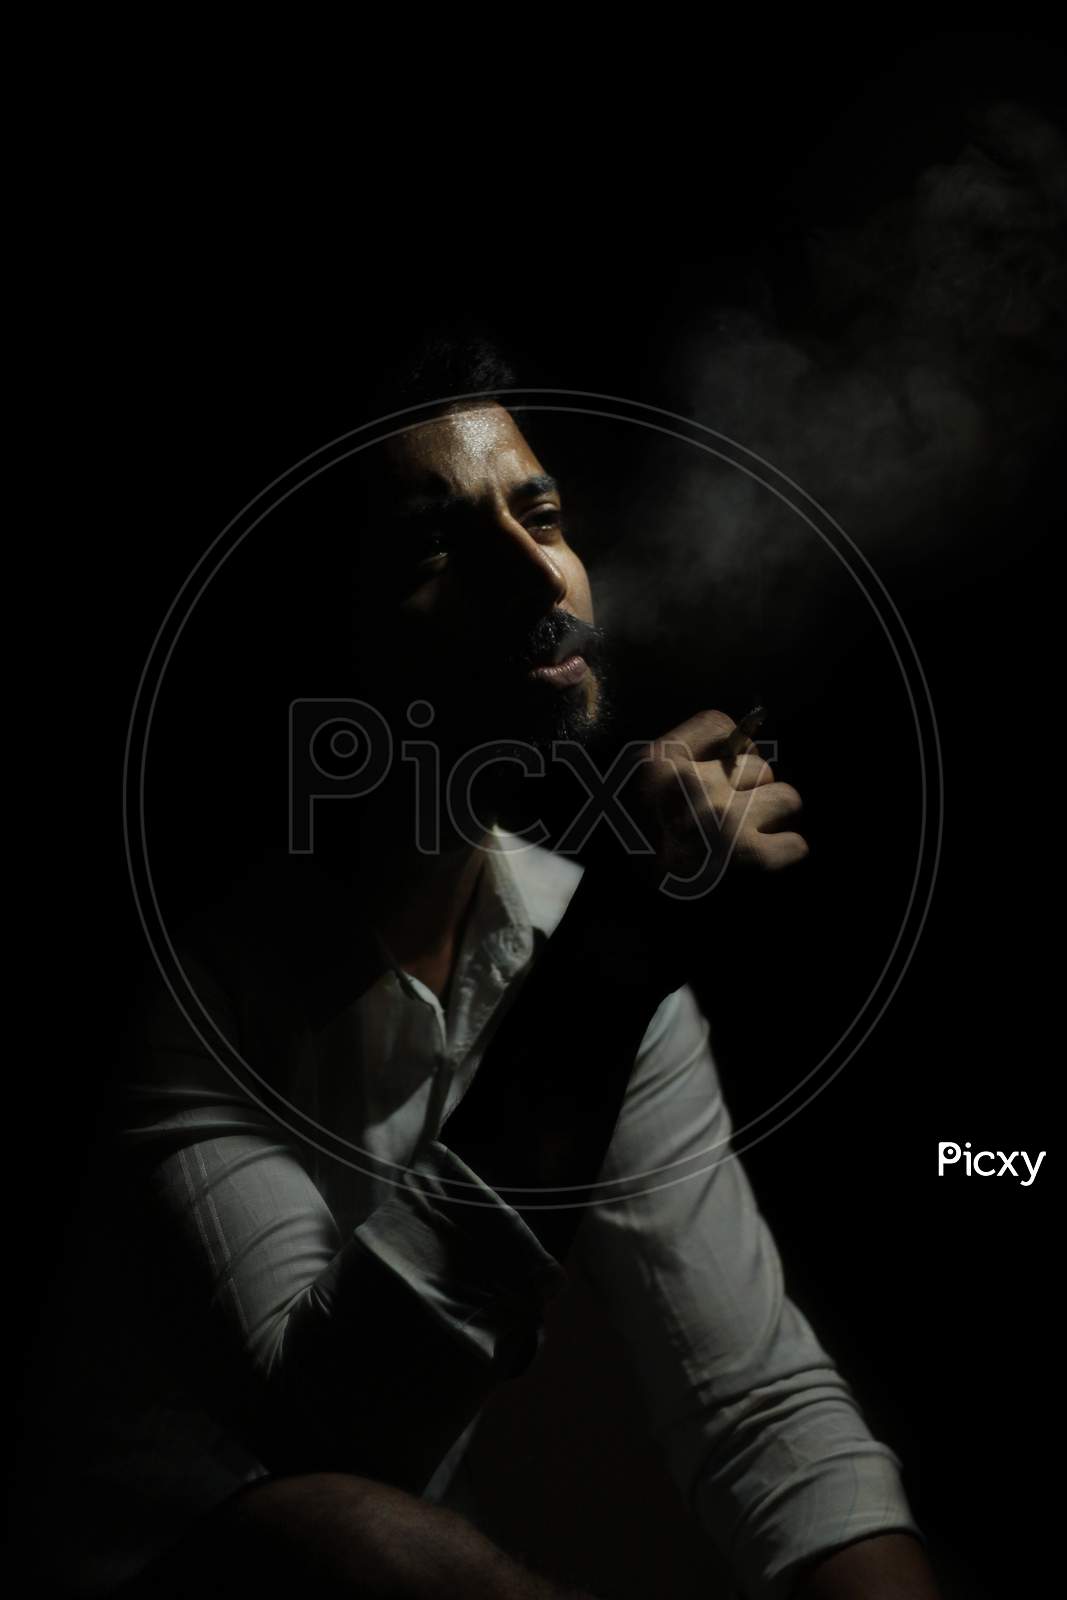 May 2020, A handsome guy smoking cigarette in a dark room.